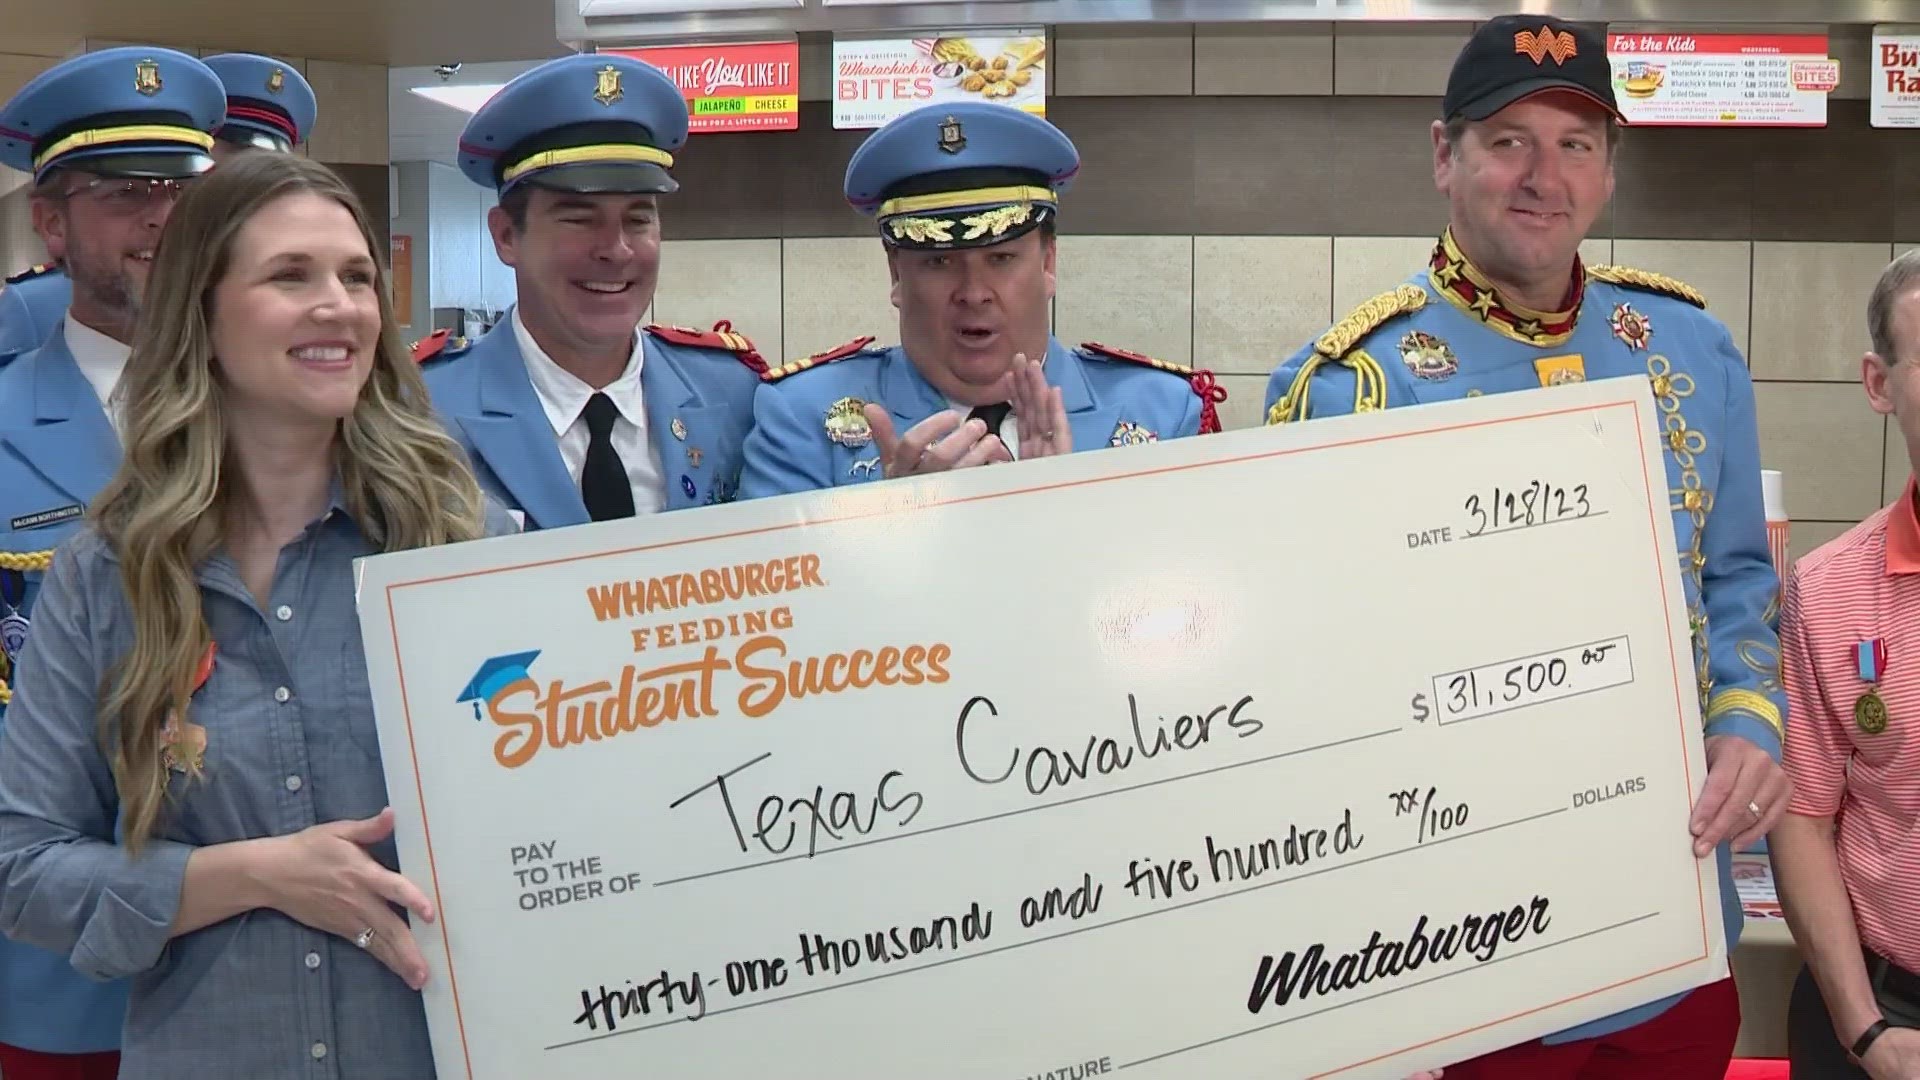 Whataburger donated $31,500 to the Texas Cavaliers for 1,500 river parade tickets for local military heroes and Wounded Warriors.